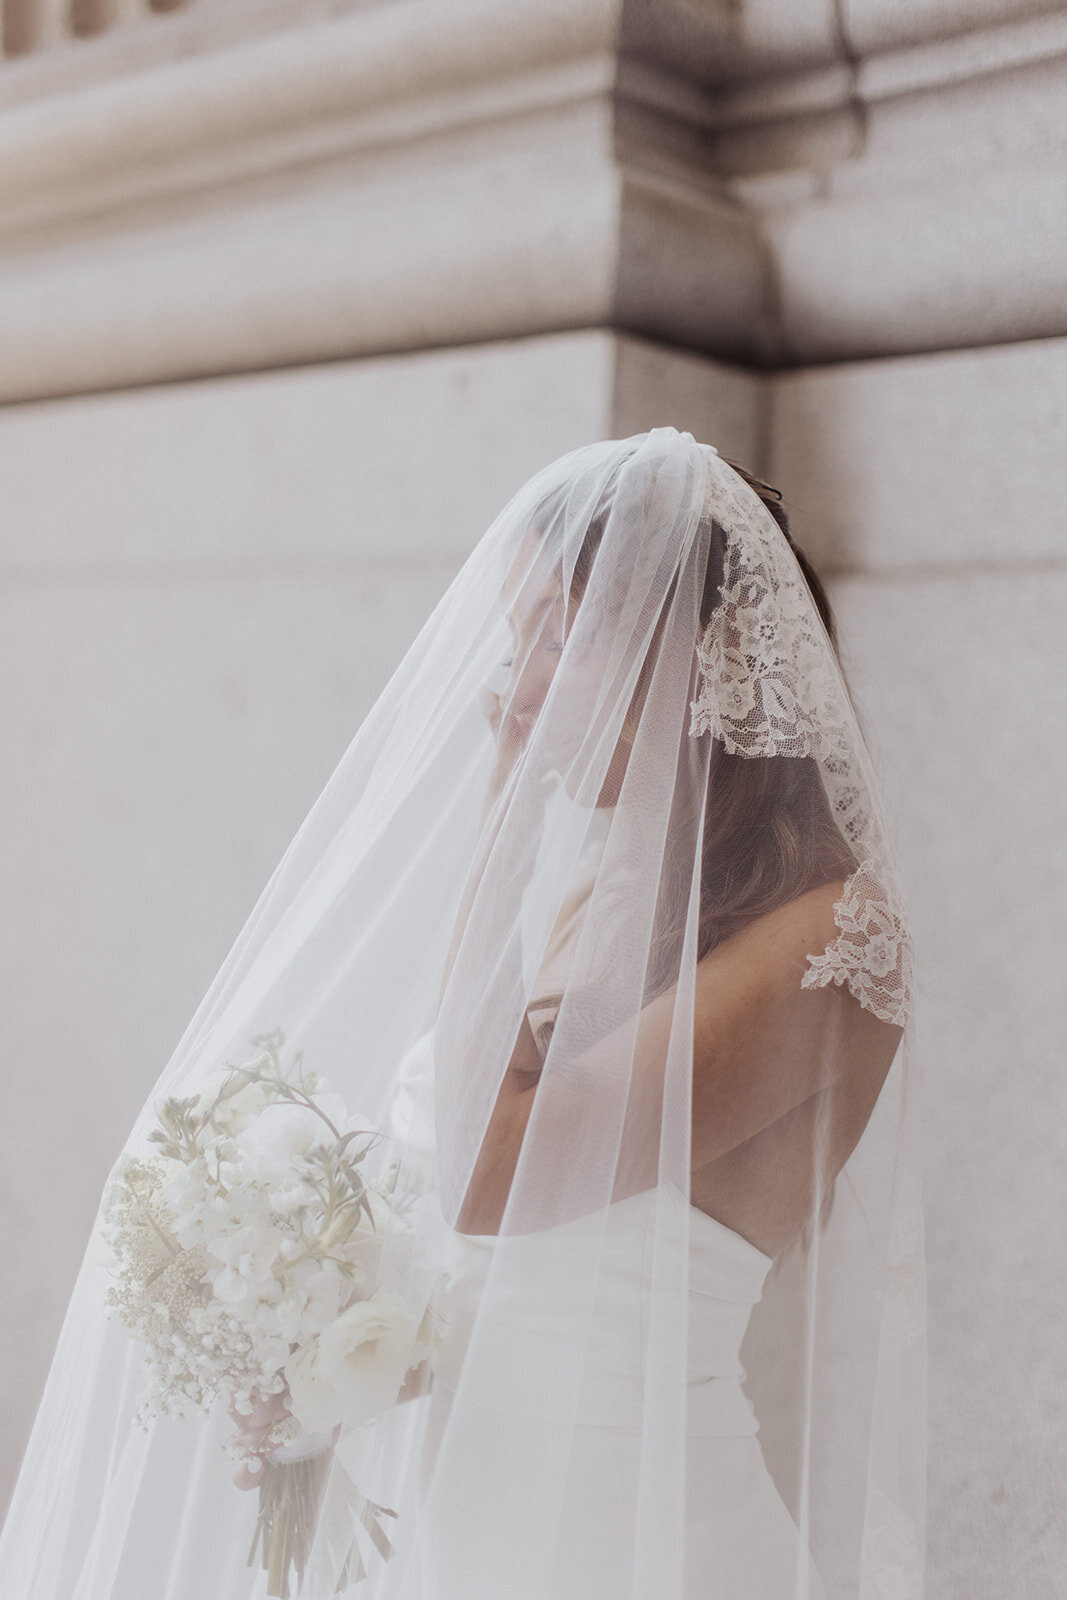 A veiled bride with a bouquet, captured in serene soft focus.